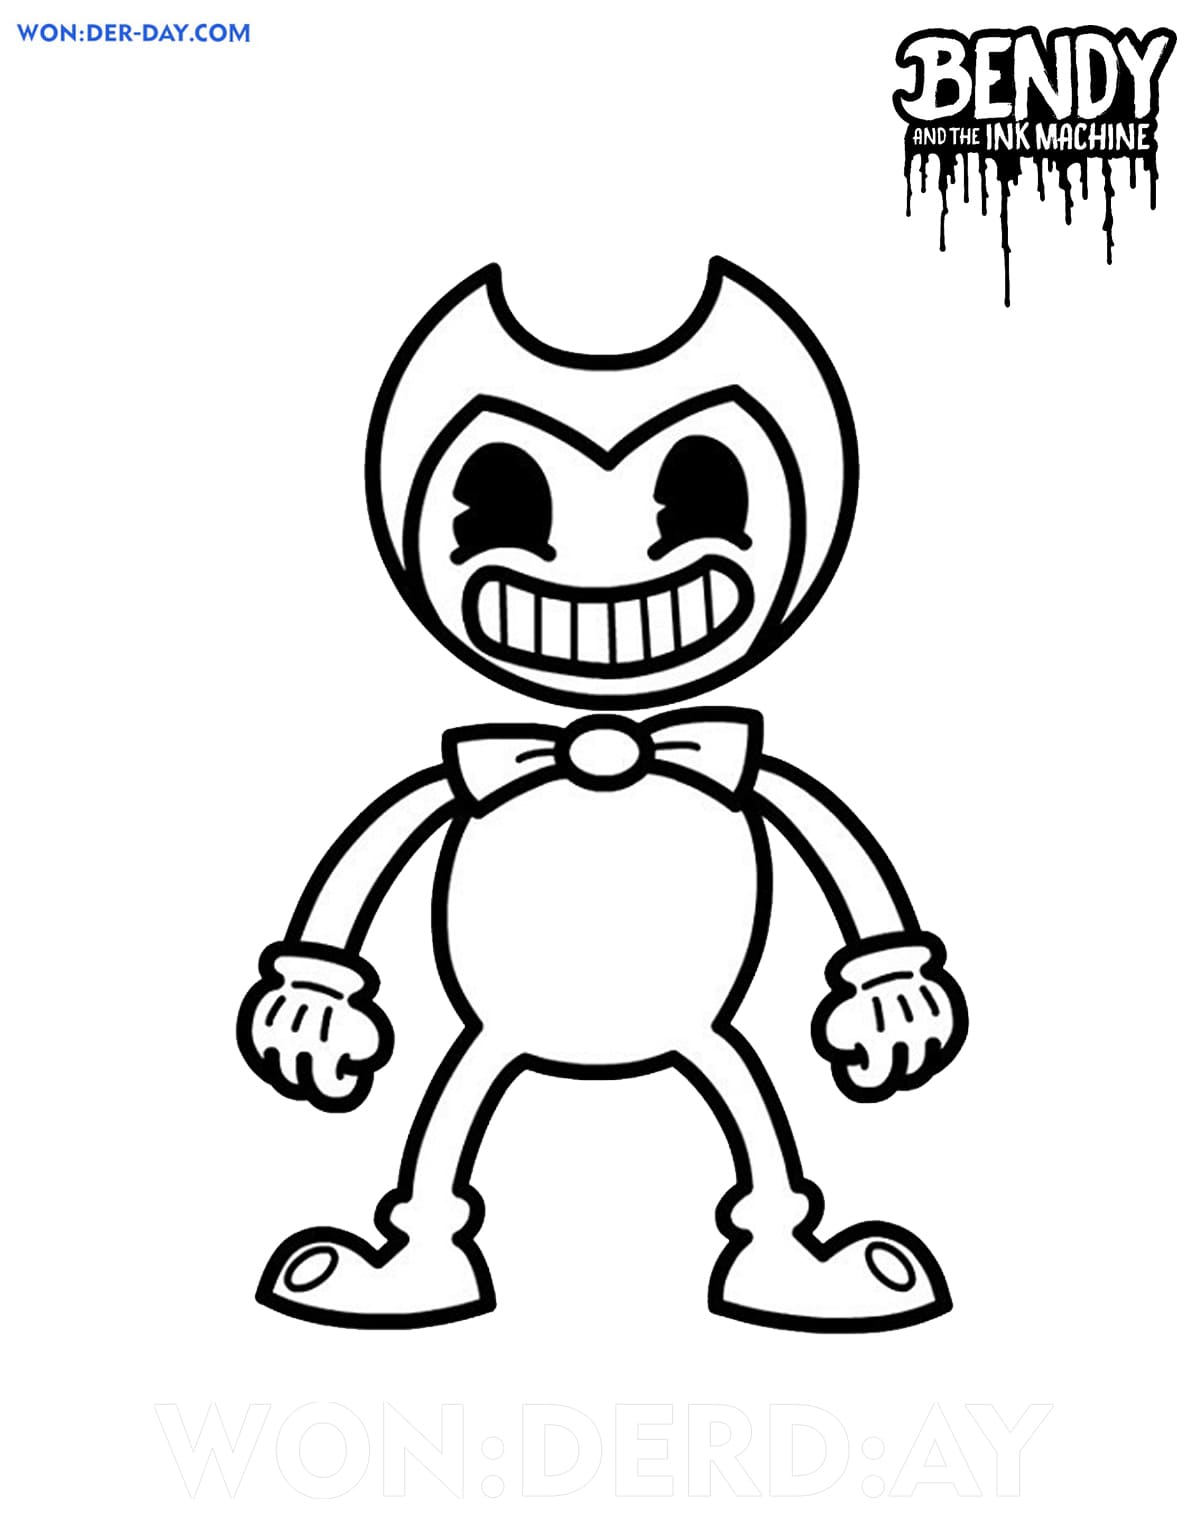 Bendy And The Ink Machine Coloring Pages Wonder Day Com